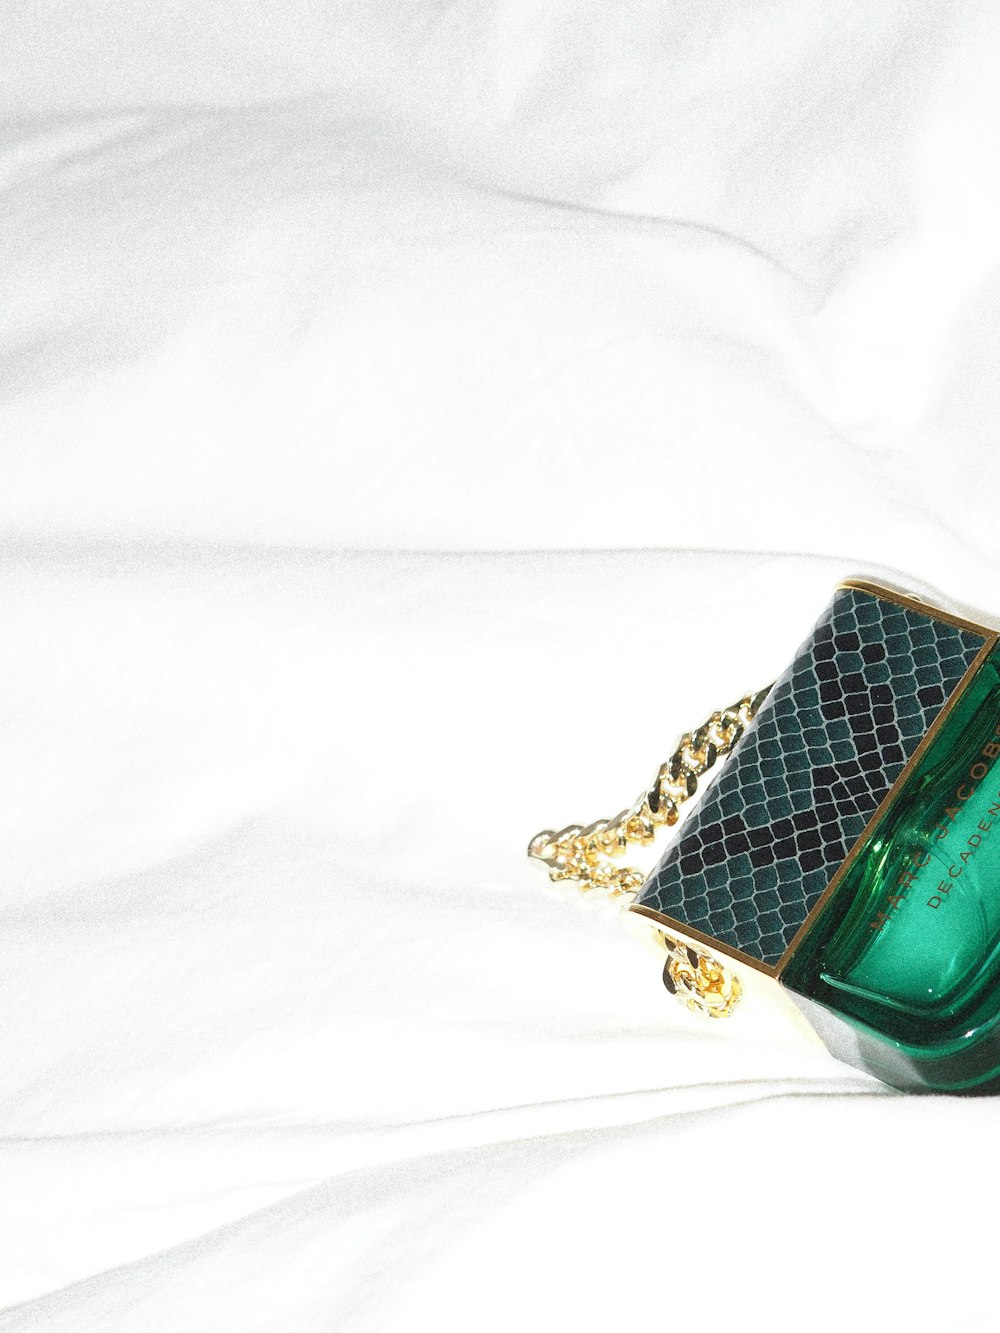 gold and green gemstone ring on white textile